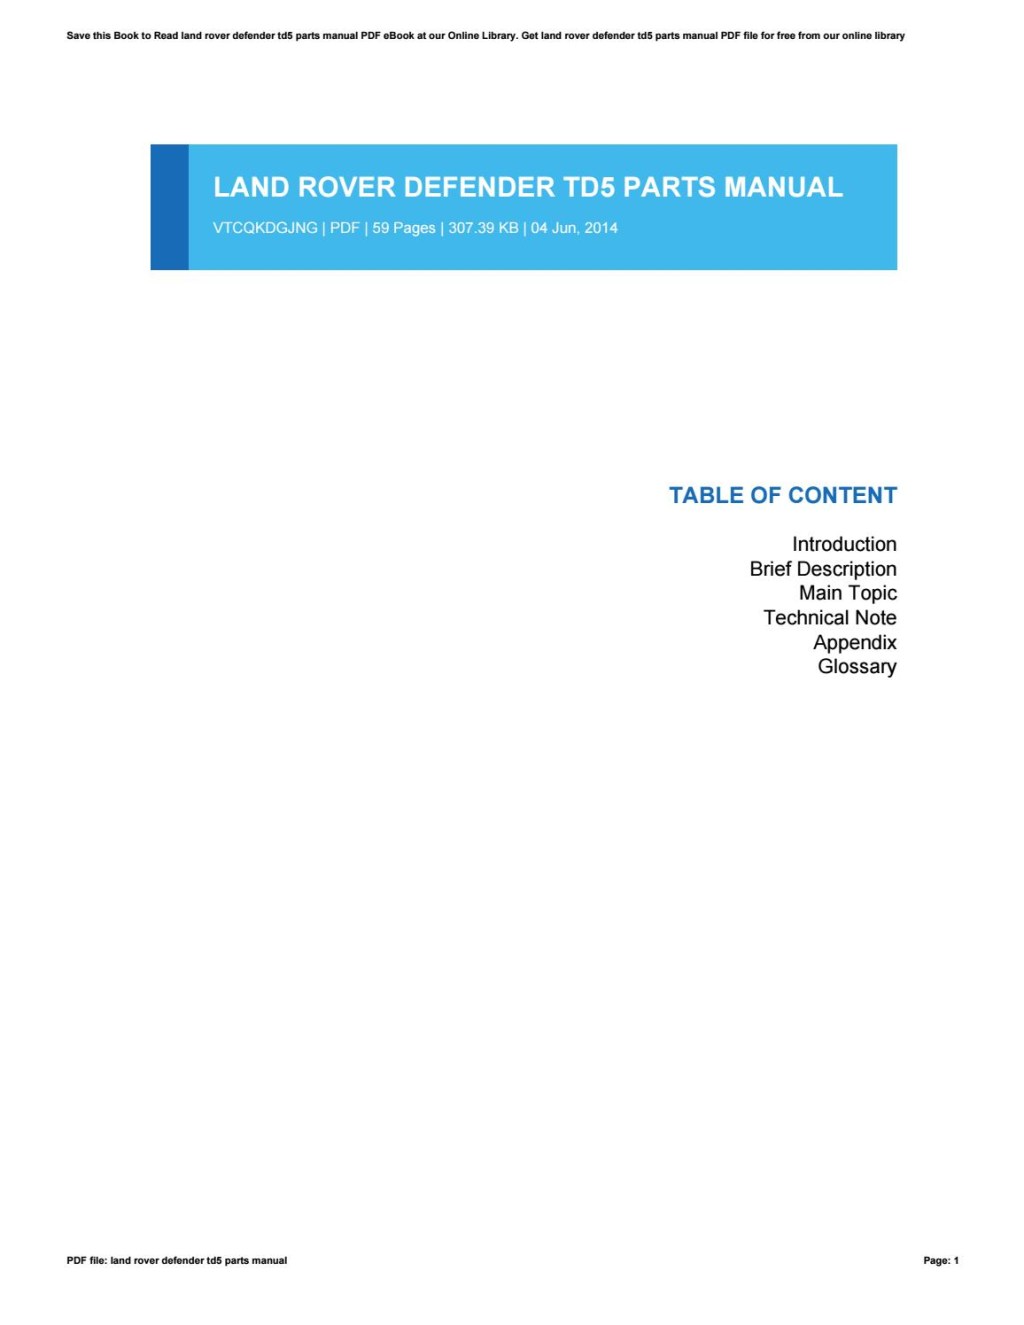 Picture of: Land rover defender td parts manual by AdenaHosley – Issuu